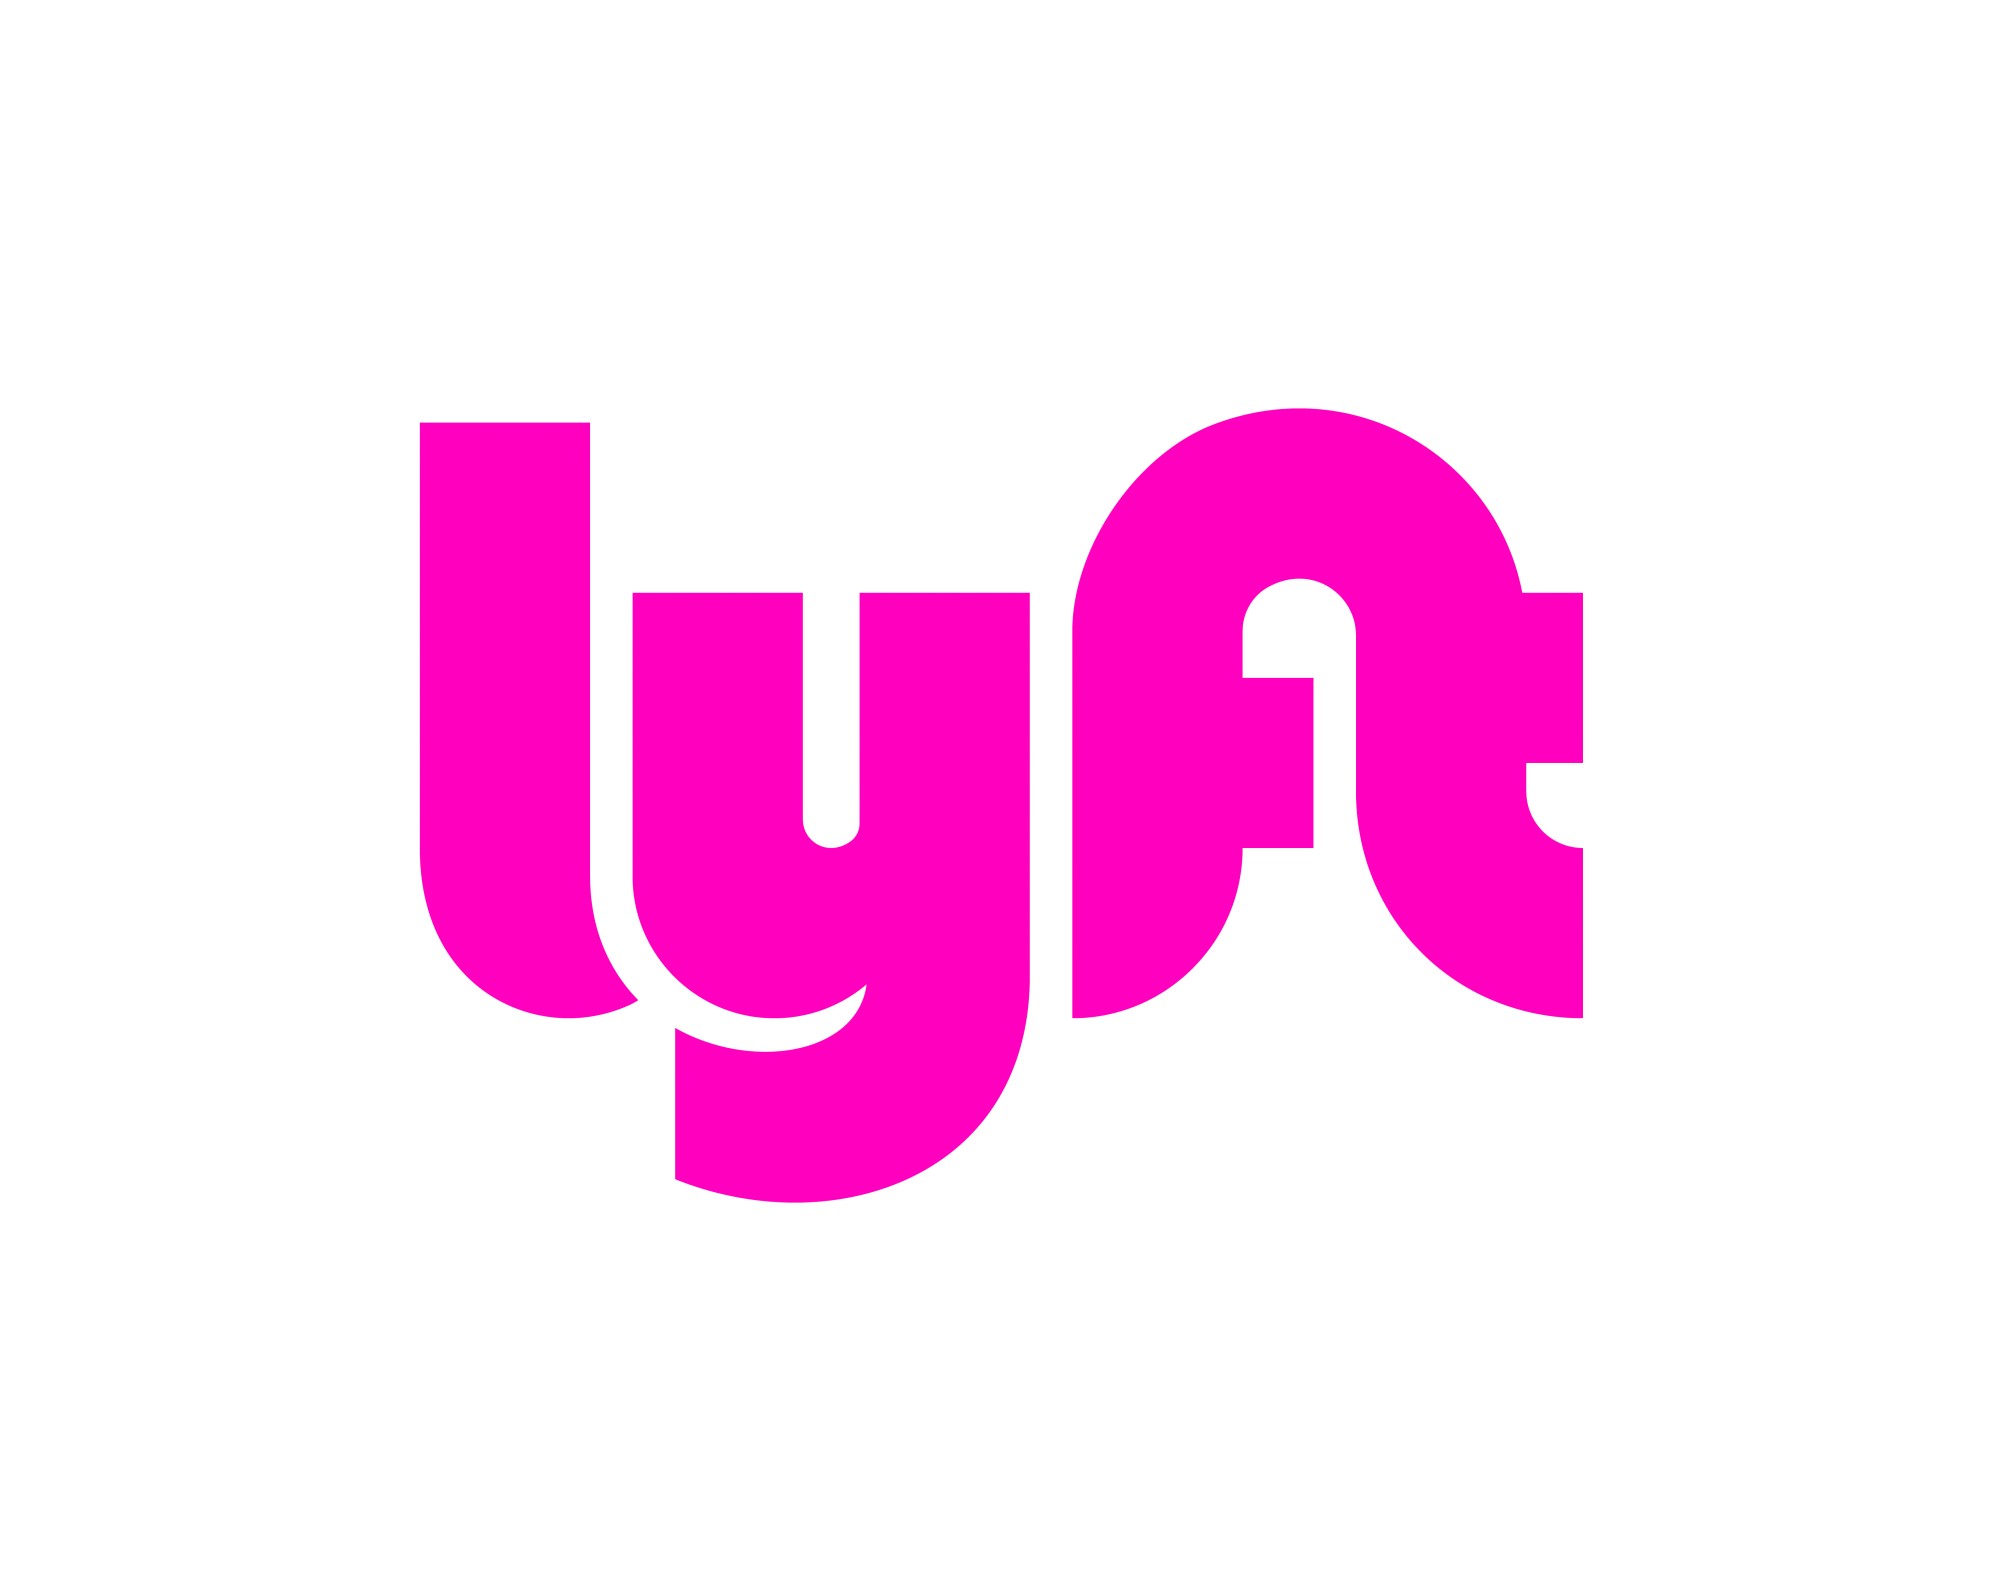 Lyft Commits To Carbon Neutrality And 100 Re Smart Energy Decisions